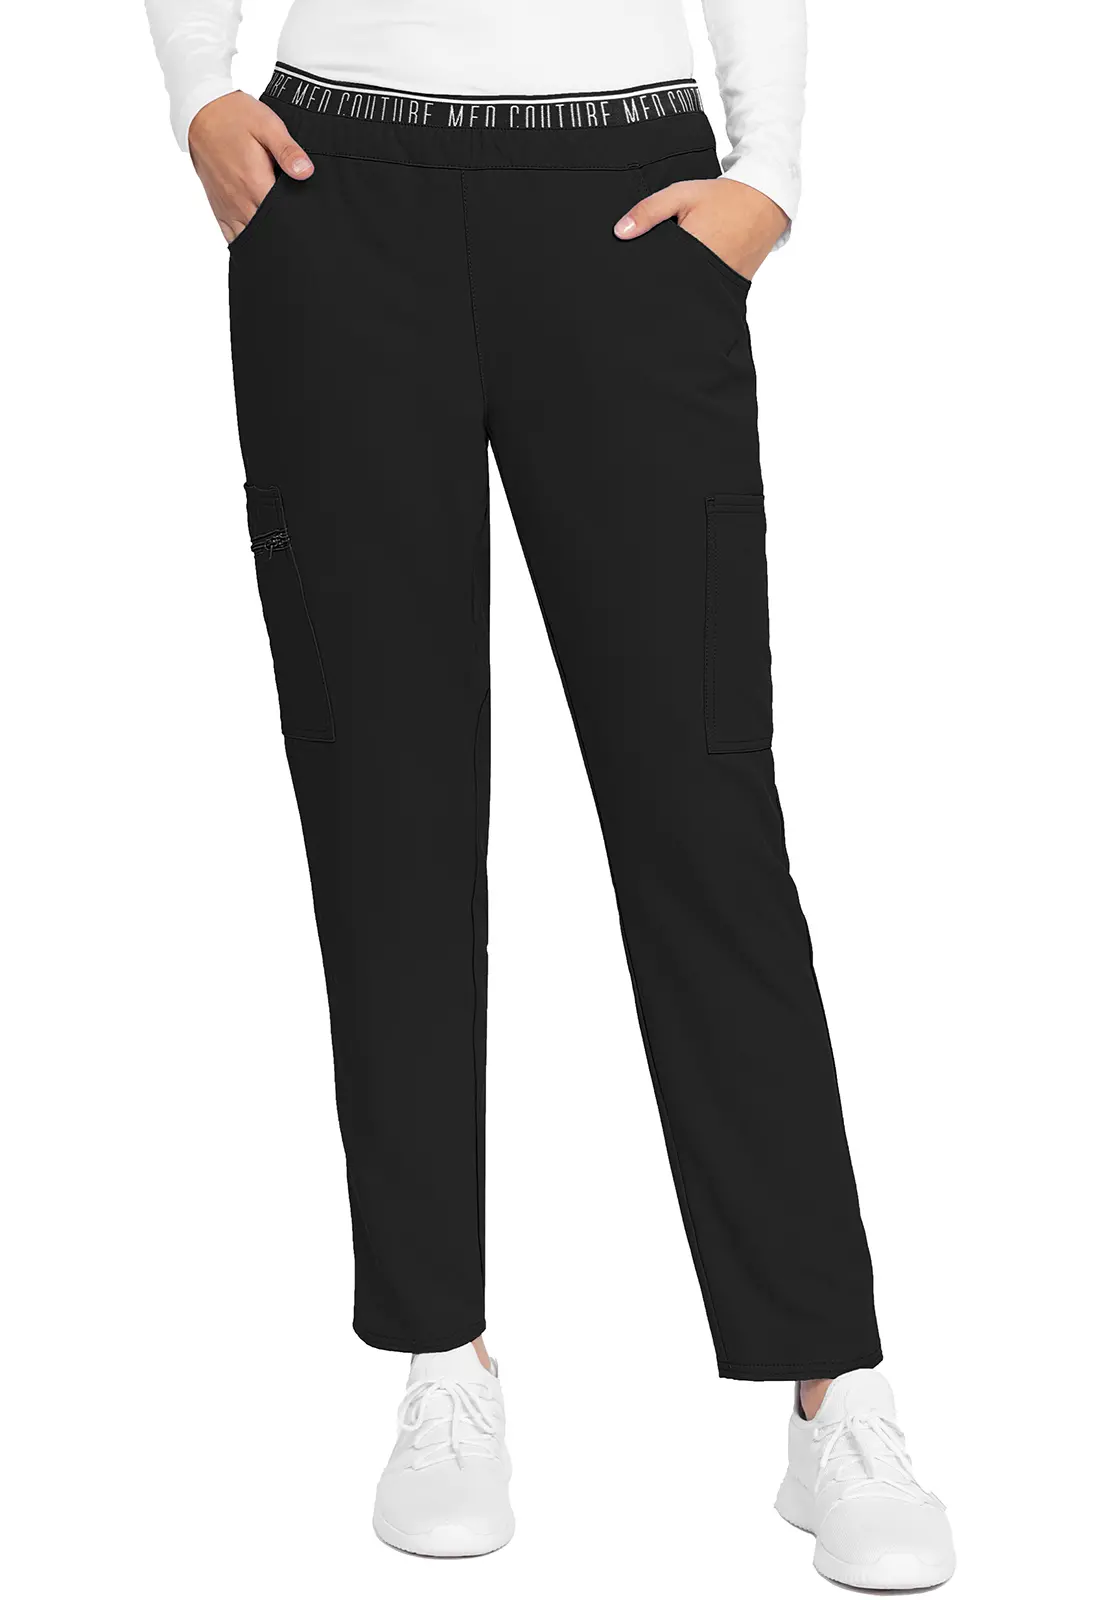 Mid-rise Tapered Leg Pull-on Pant